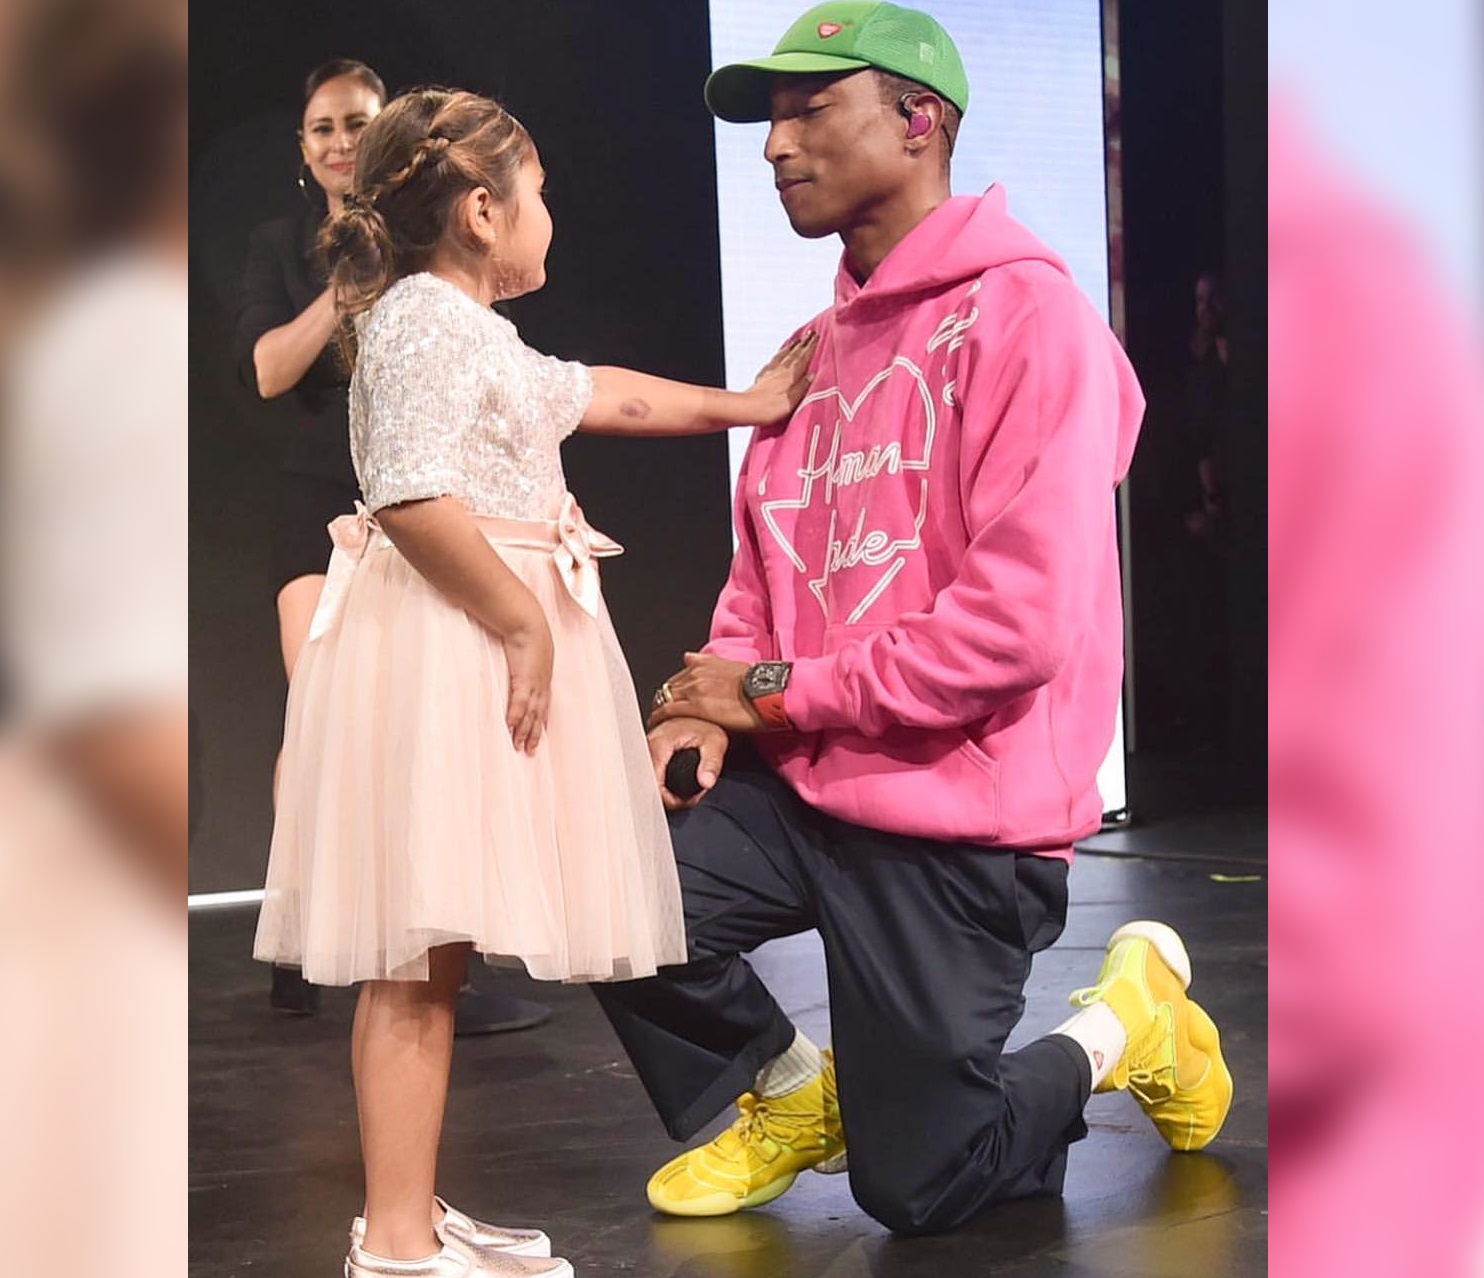 SPOTTED: Pharrell in adidas and Human Made while Performing for Children’s Hospital L.A.